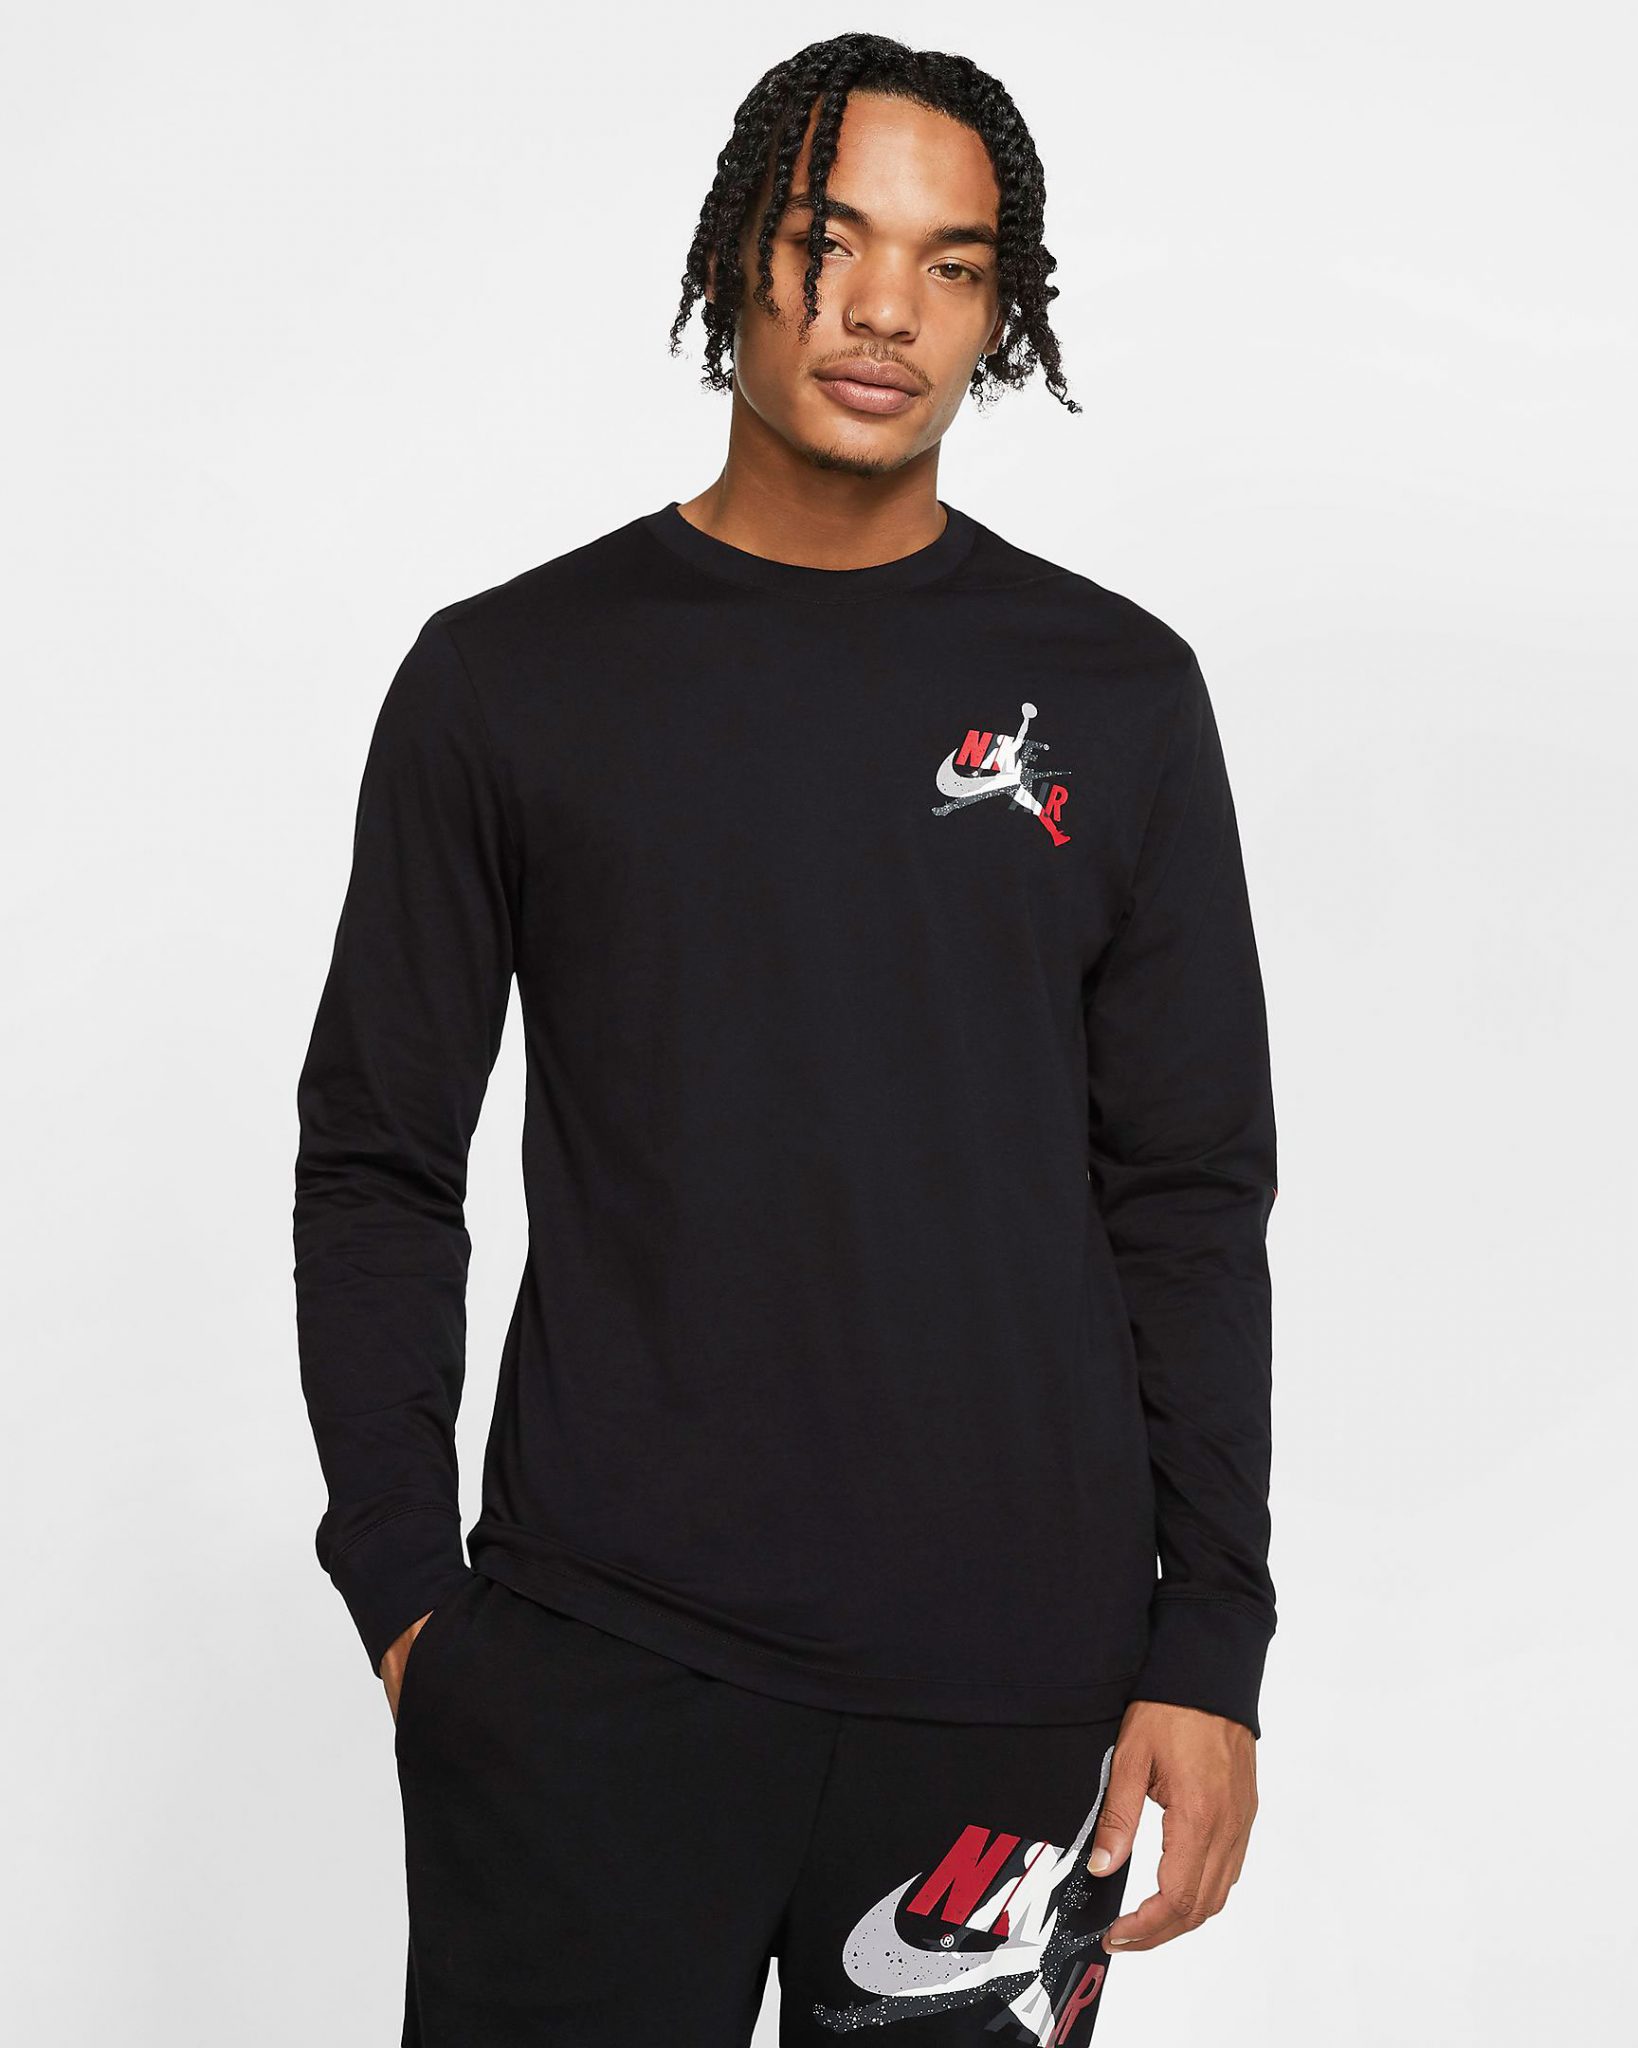 Air Jordan 3 Red Cement Clothing to Match | SneakerFits.com